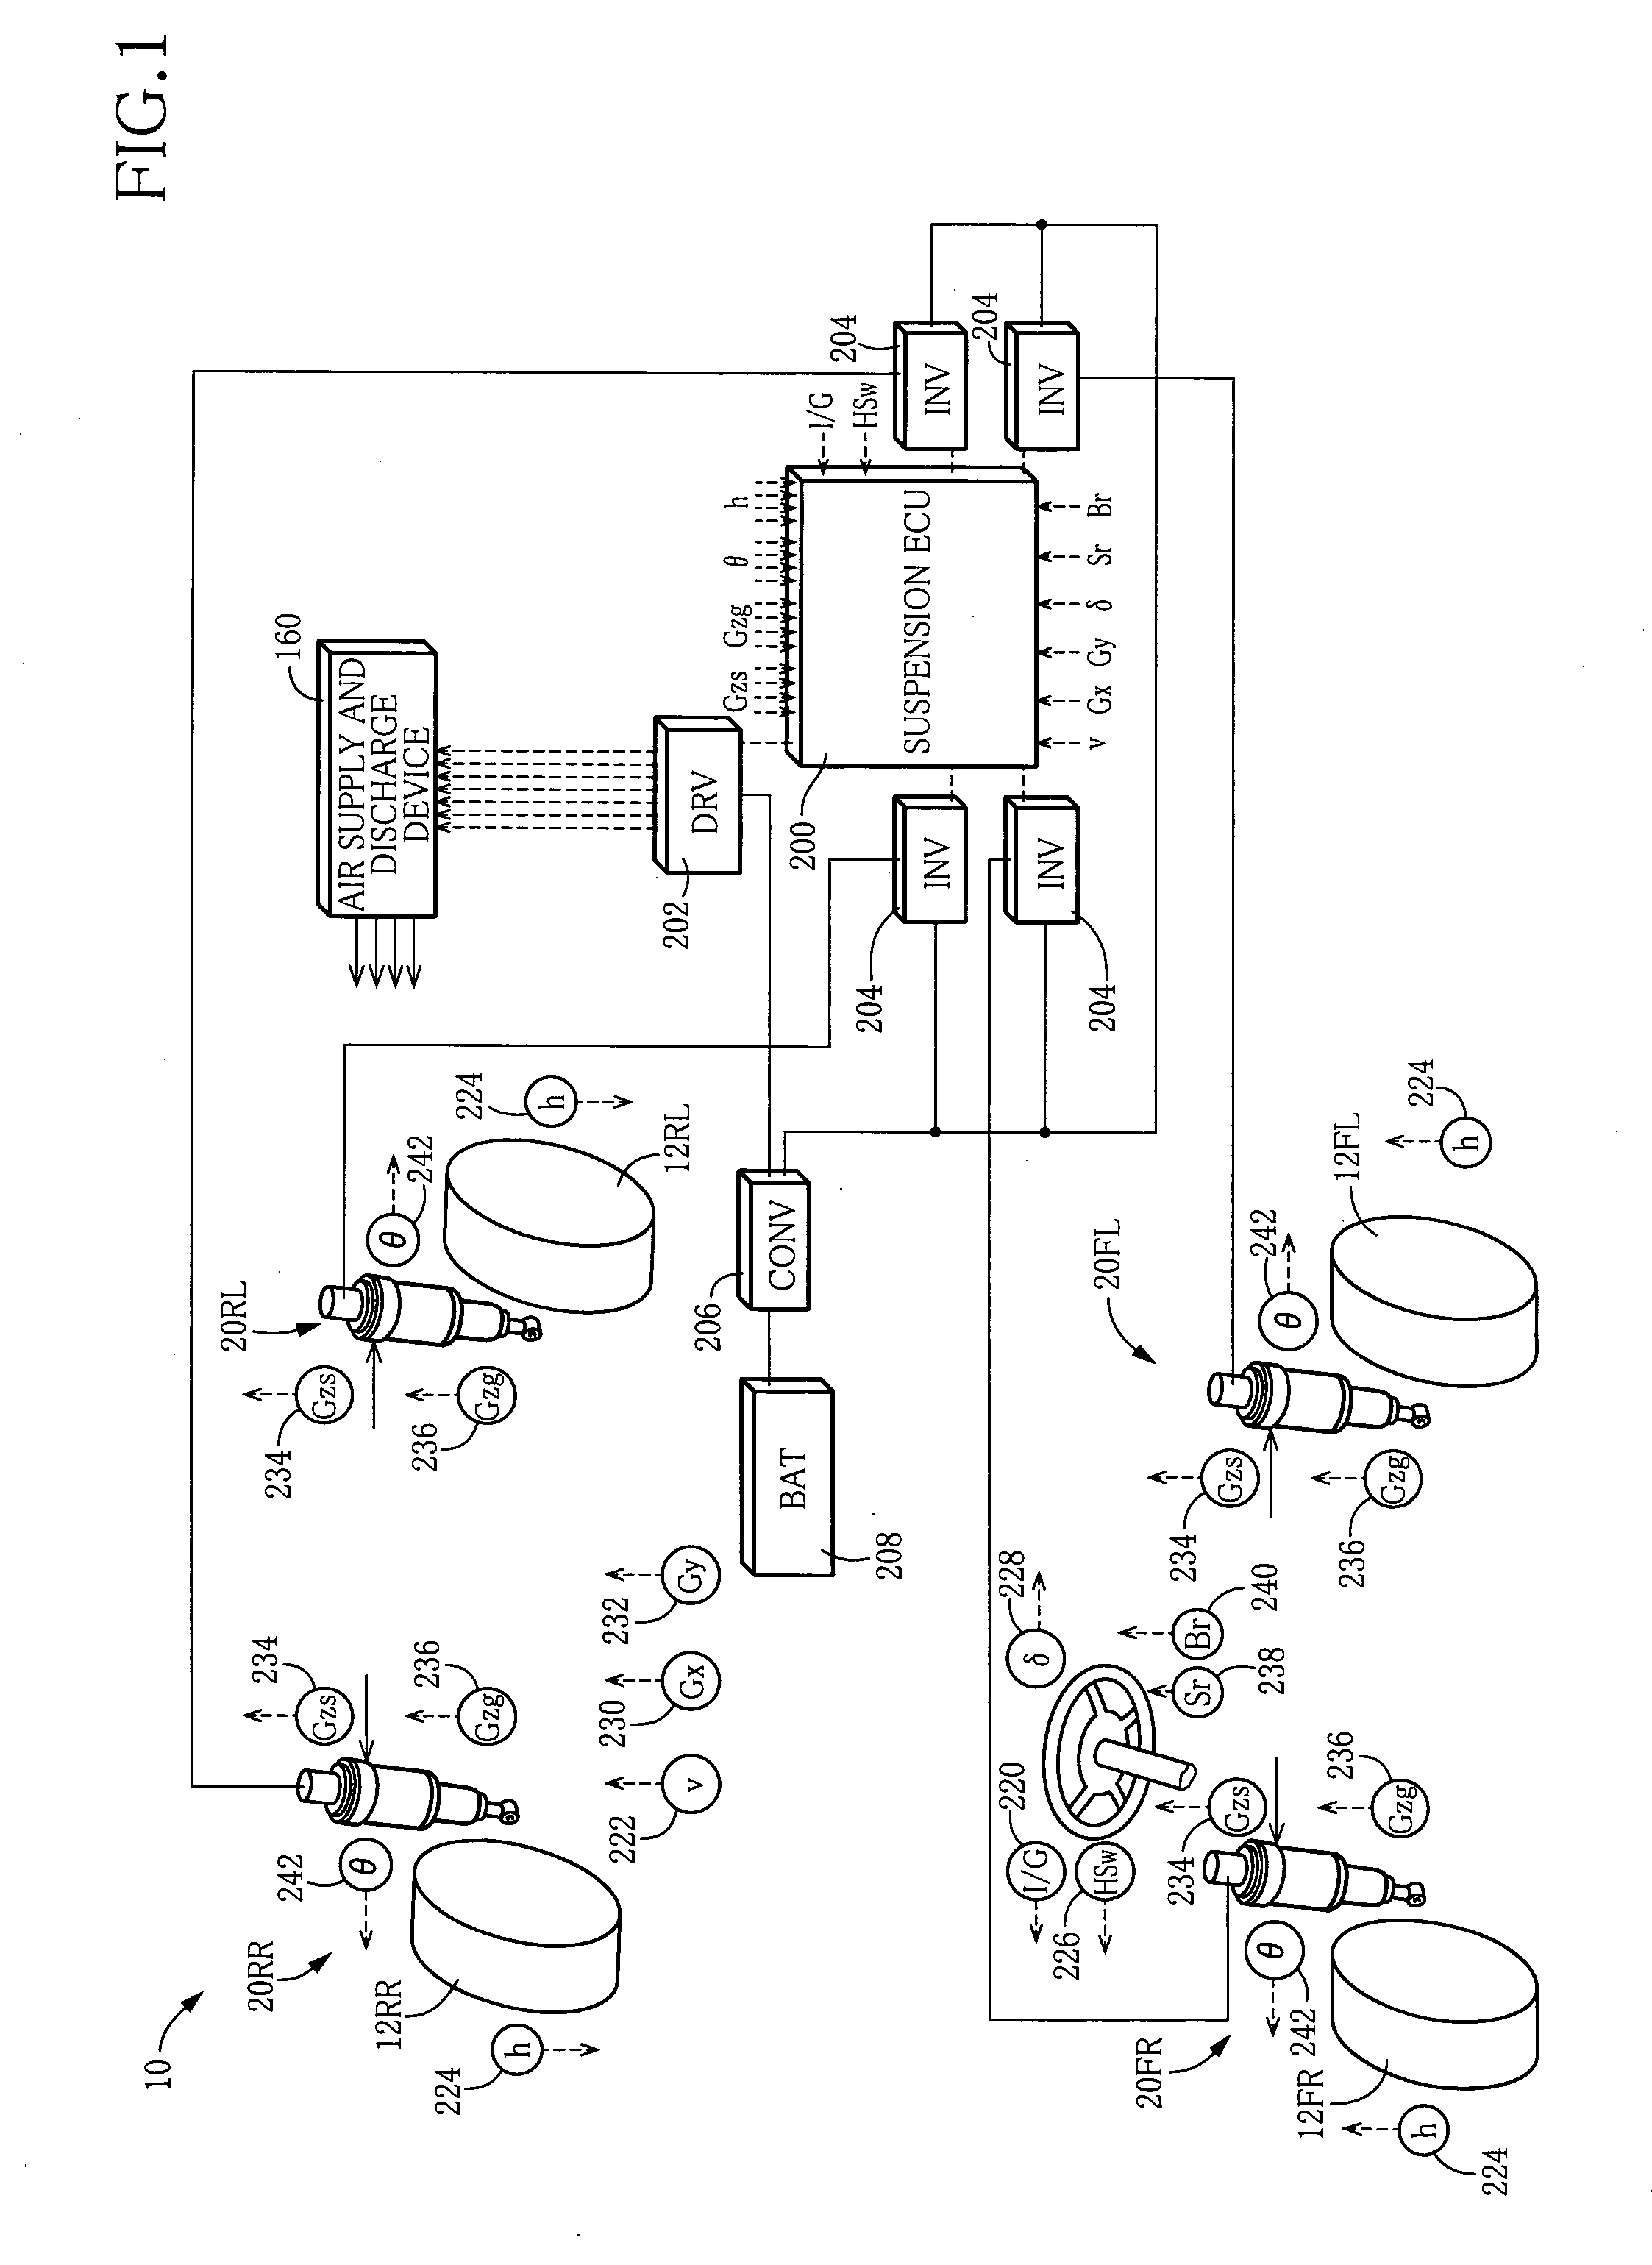 Suspension system for a vehicle including an electromagnetic actuator